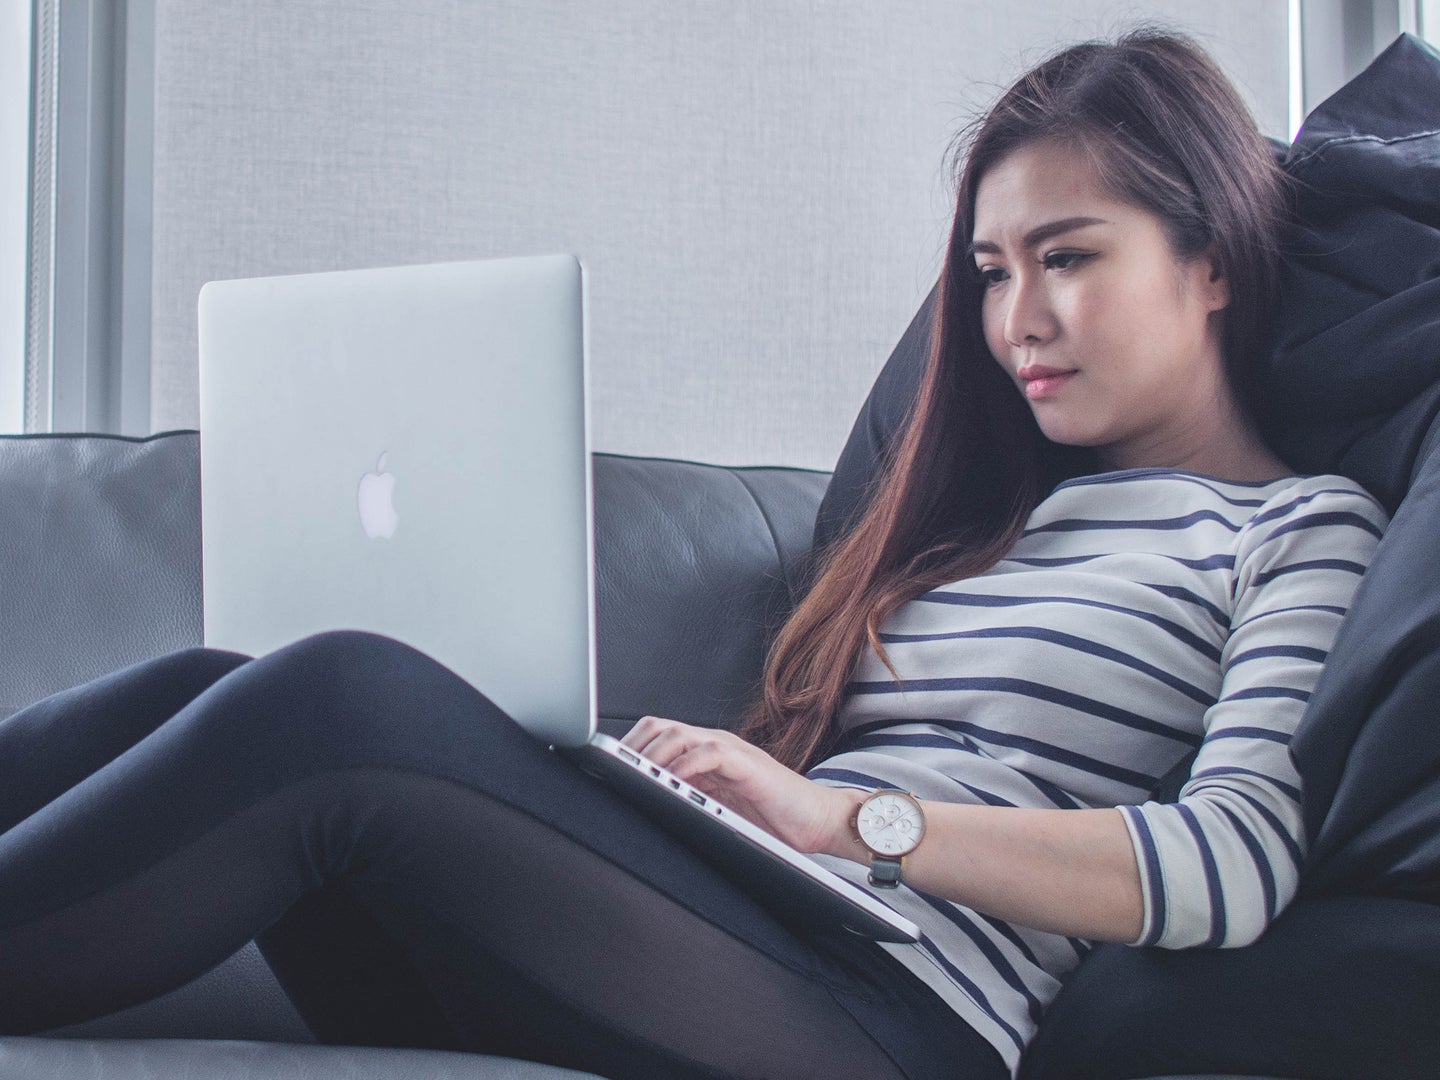 A woman lounging on a couch with a silver Macbook on her lap, possibly considering how she can create shortcuts for macOS.